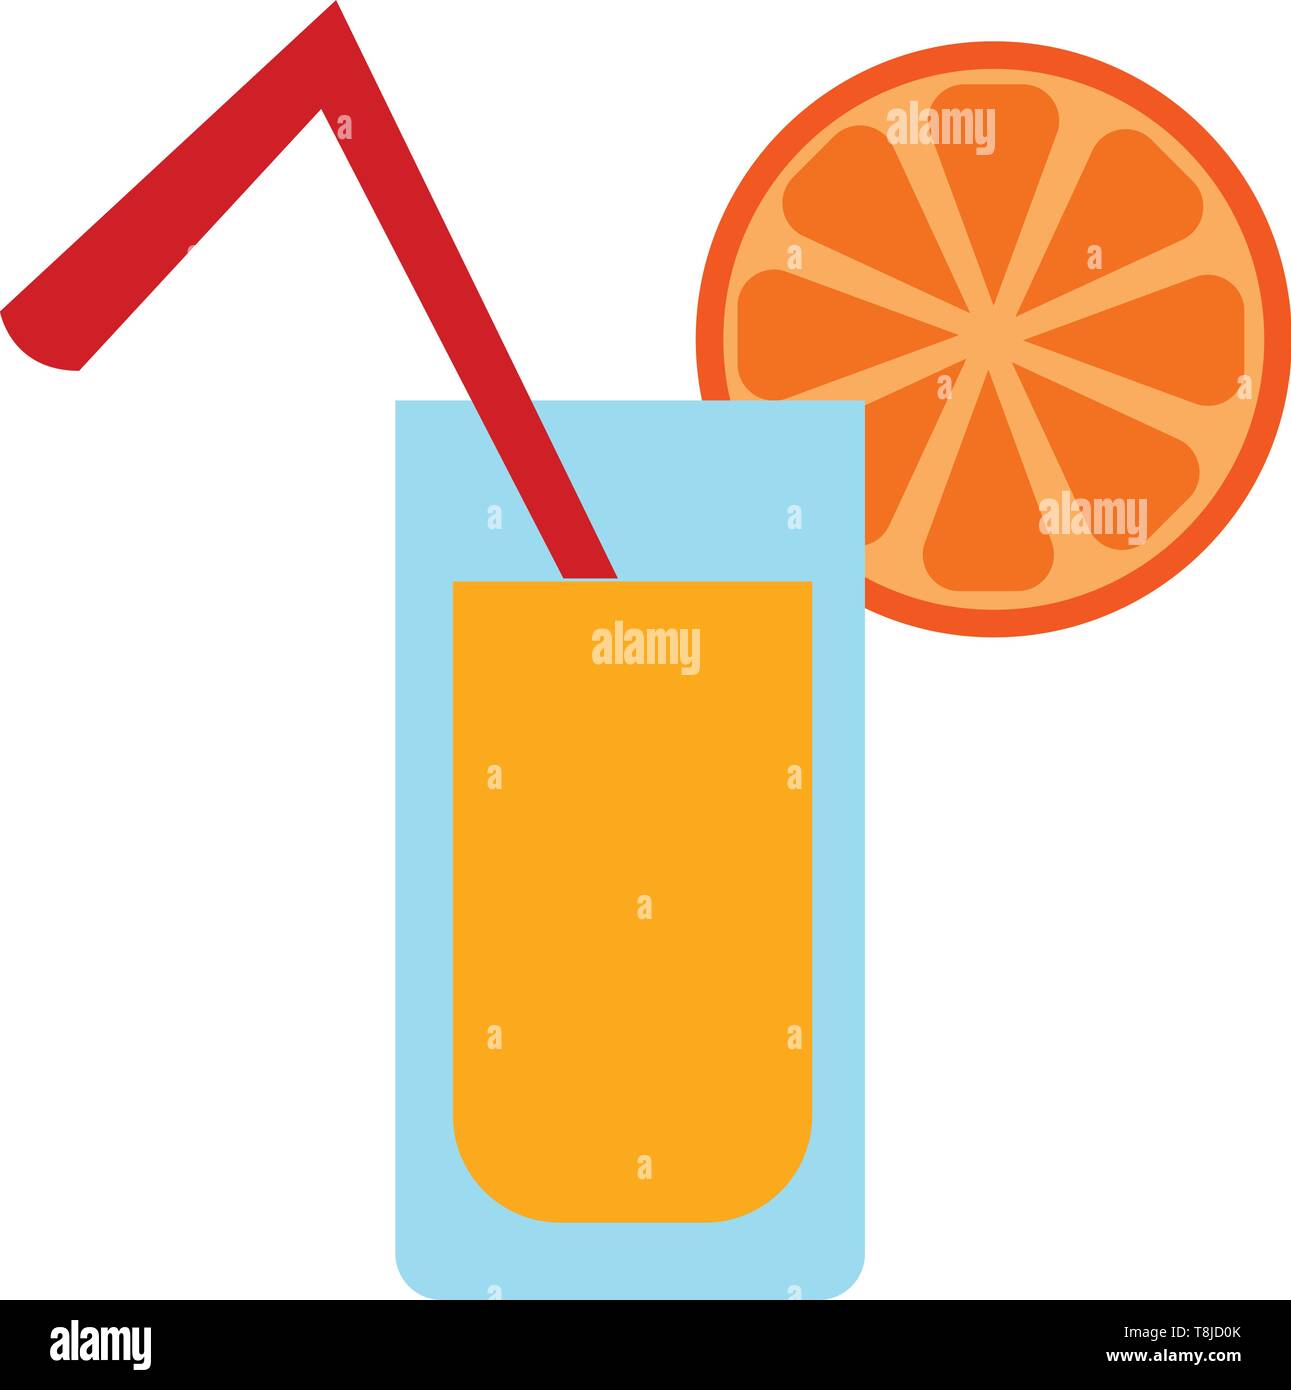 Featured image of post How To Draw A Glass Of Orange Juice Soften the orange first by rolling it gently to release the juices try different varieties of oranges to see which you like best for juices